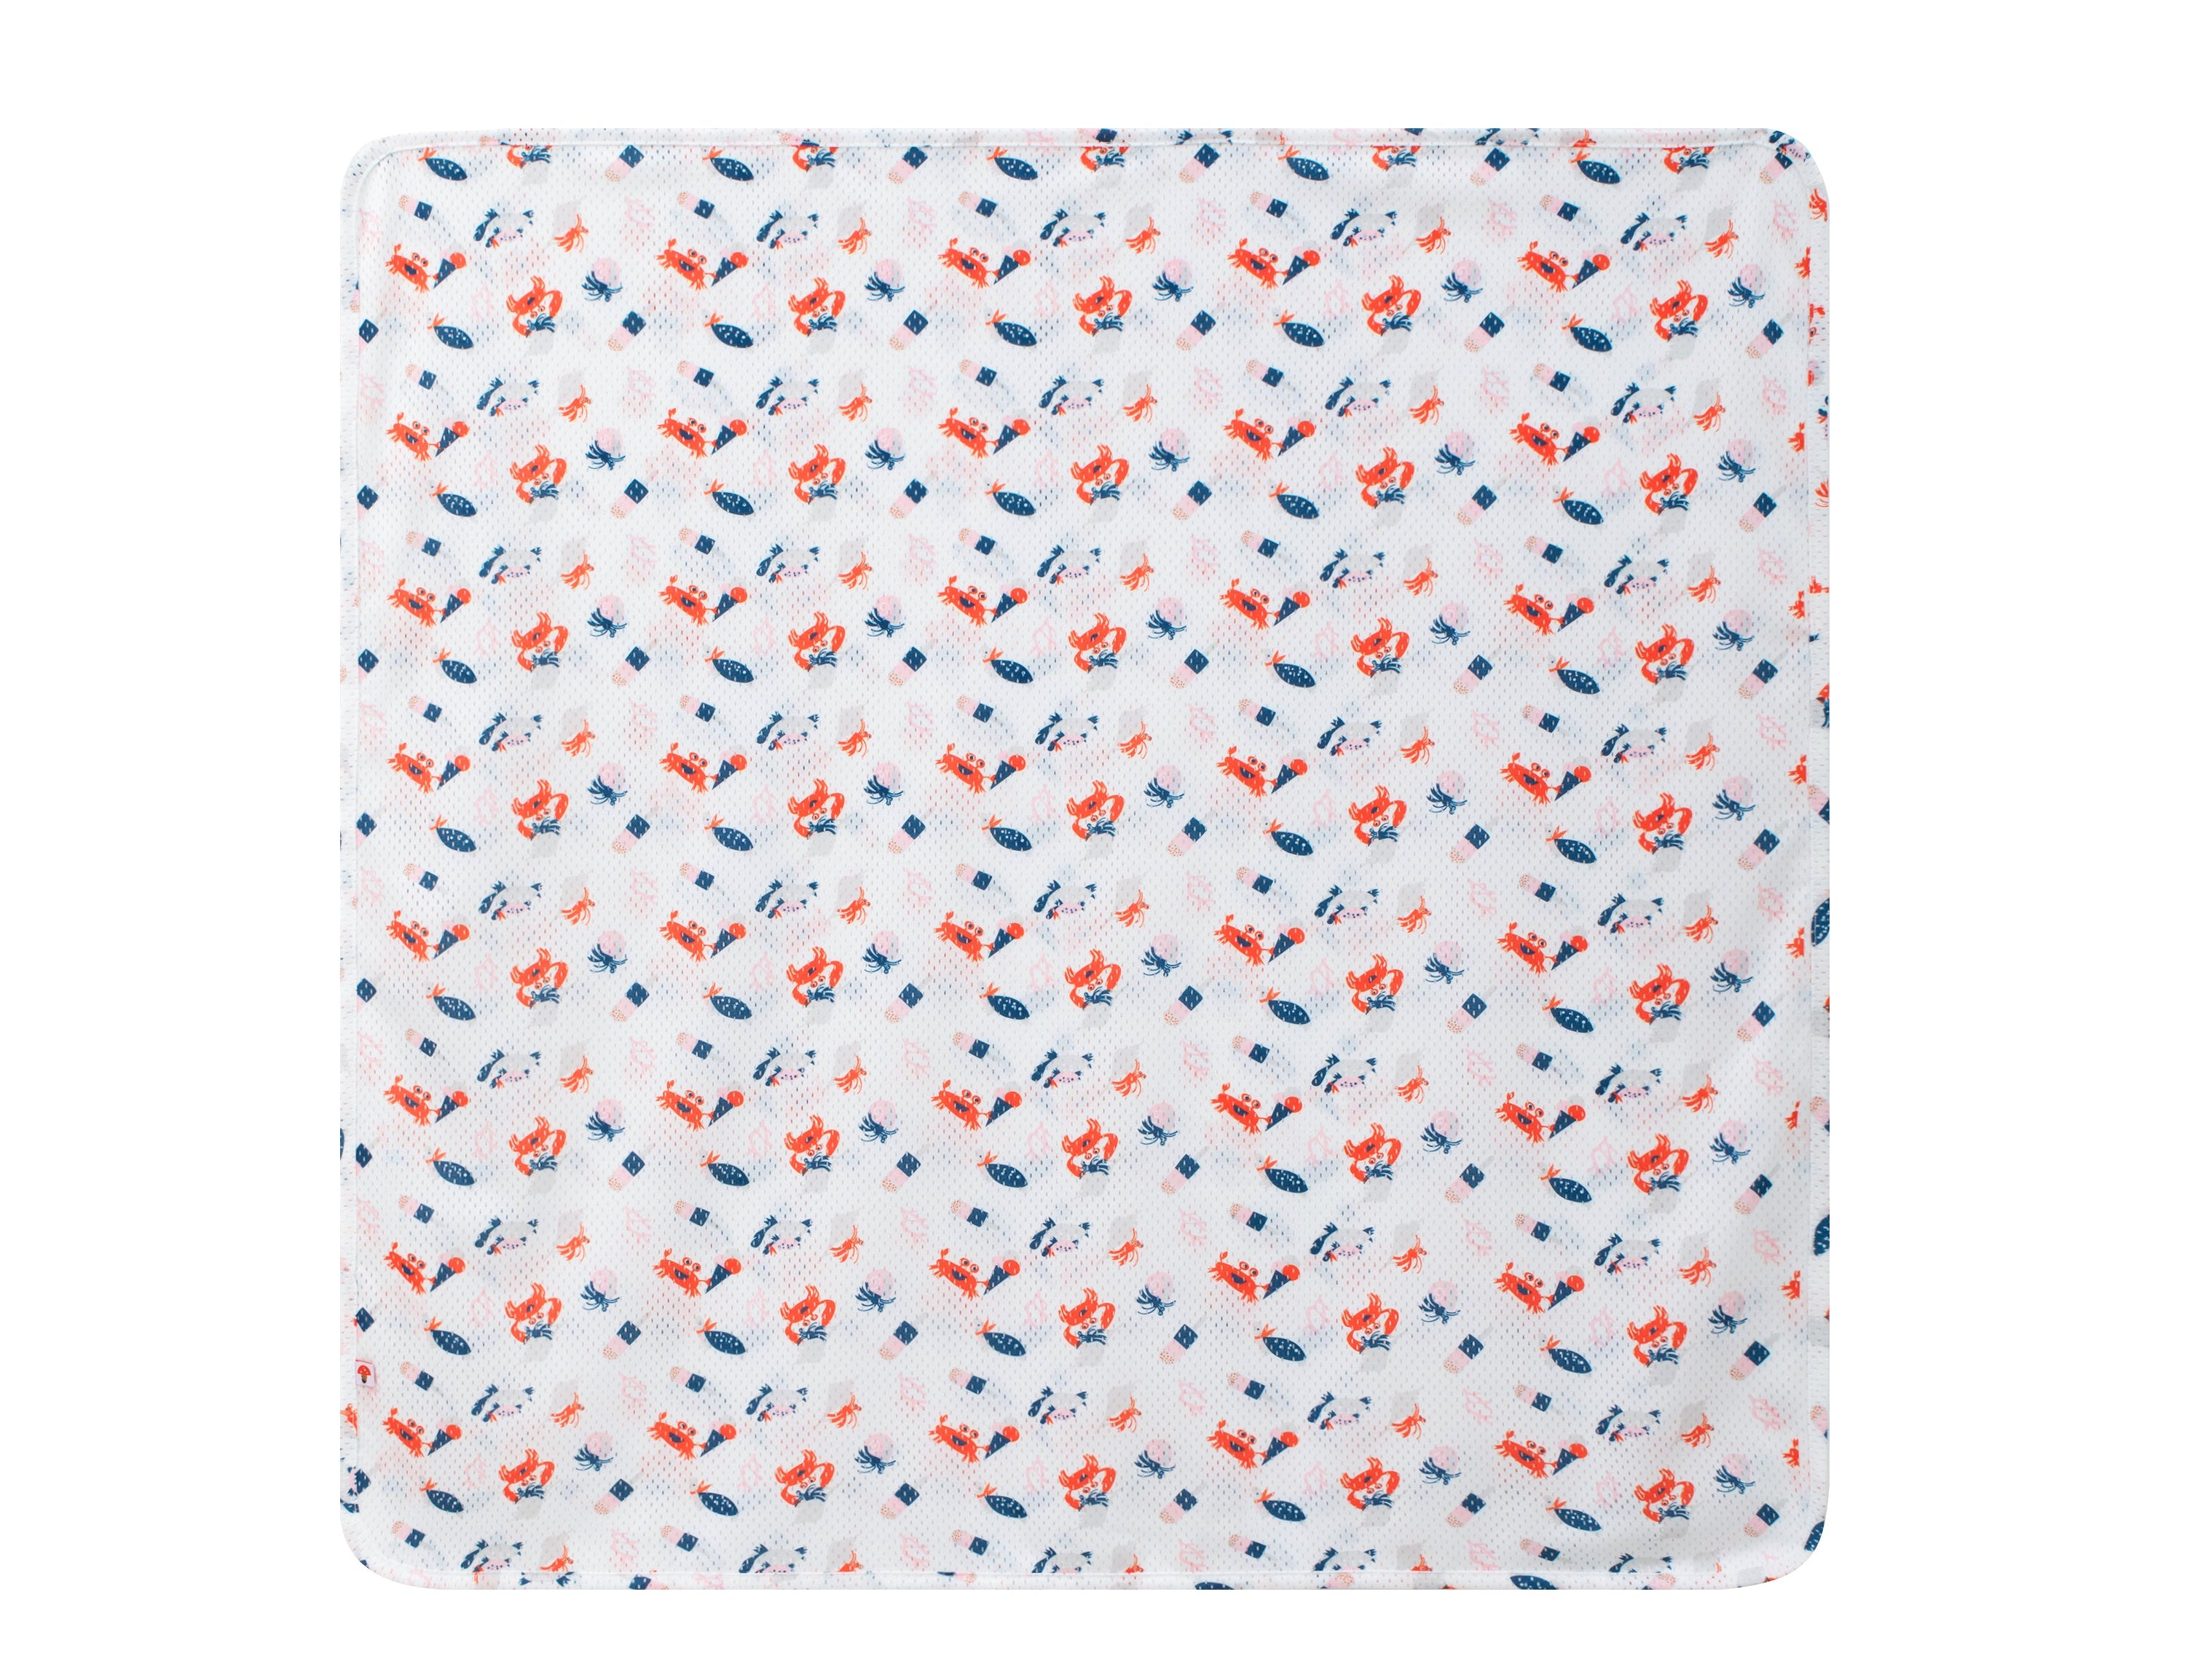 Vauva SS24 - Baby Printed Blanket (Crab) - Product 1